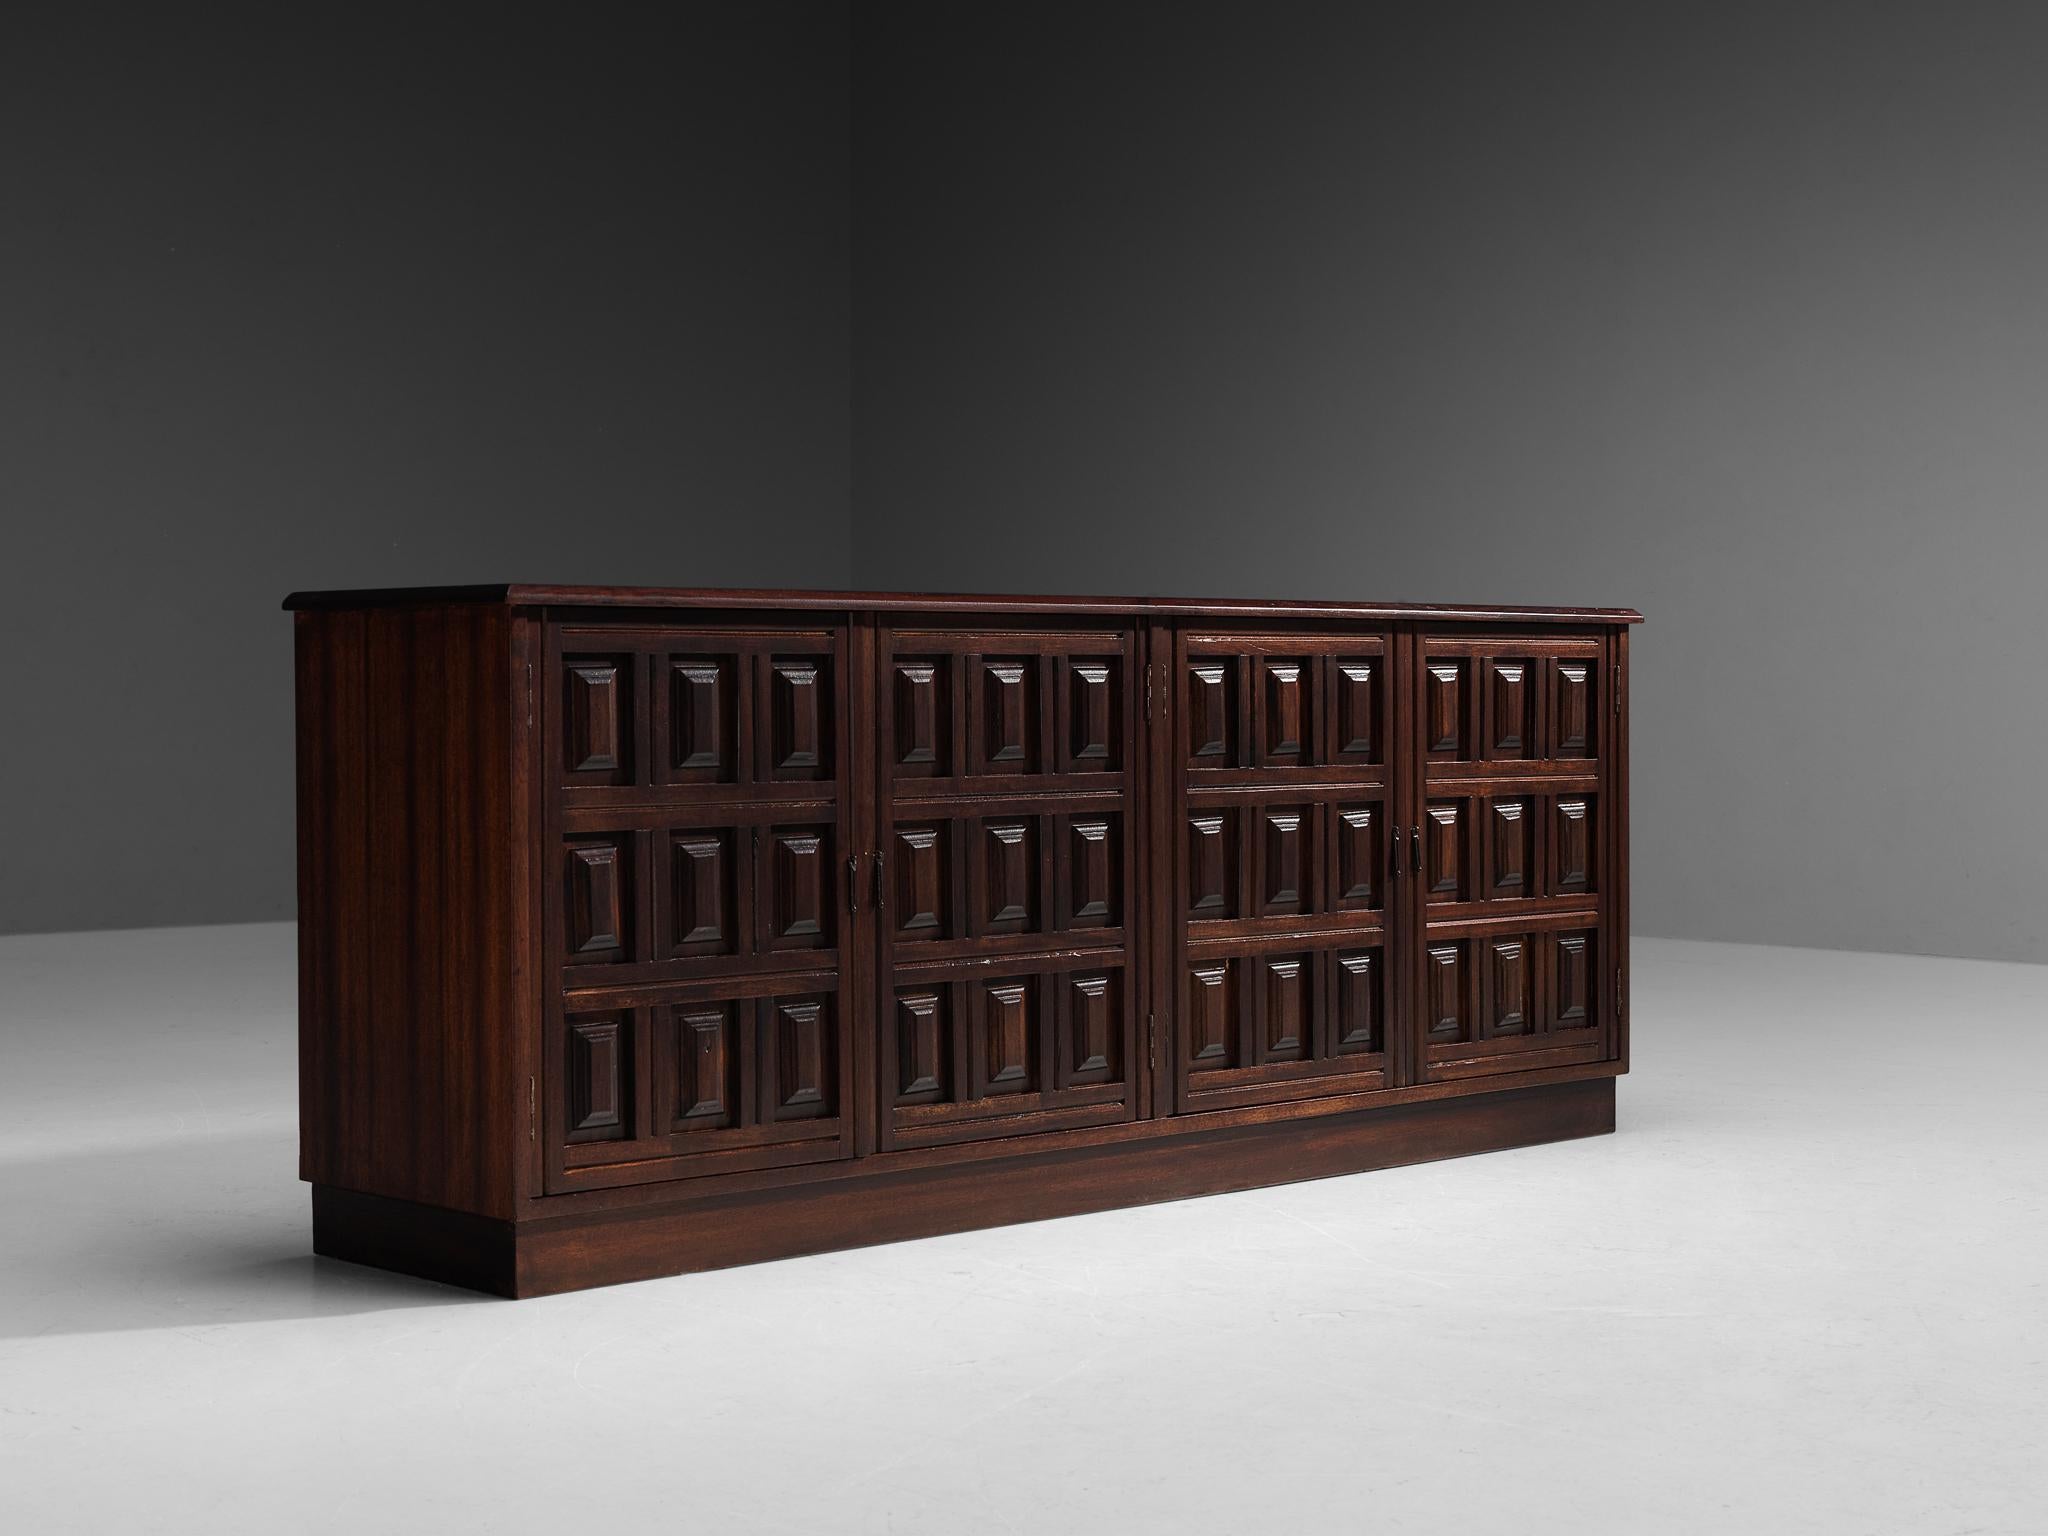 Sideboard, mahogany, Spain, 1970s.

Robust and rich Spanish sideboard in red stained mahogany. The sideboard has four doors with great woodwork in rectangular pattern with small metal bar-handles for opening them. The interior offers plenty of